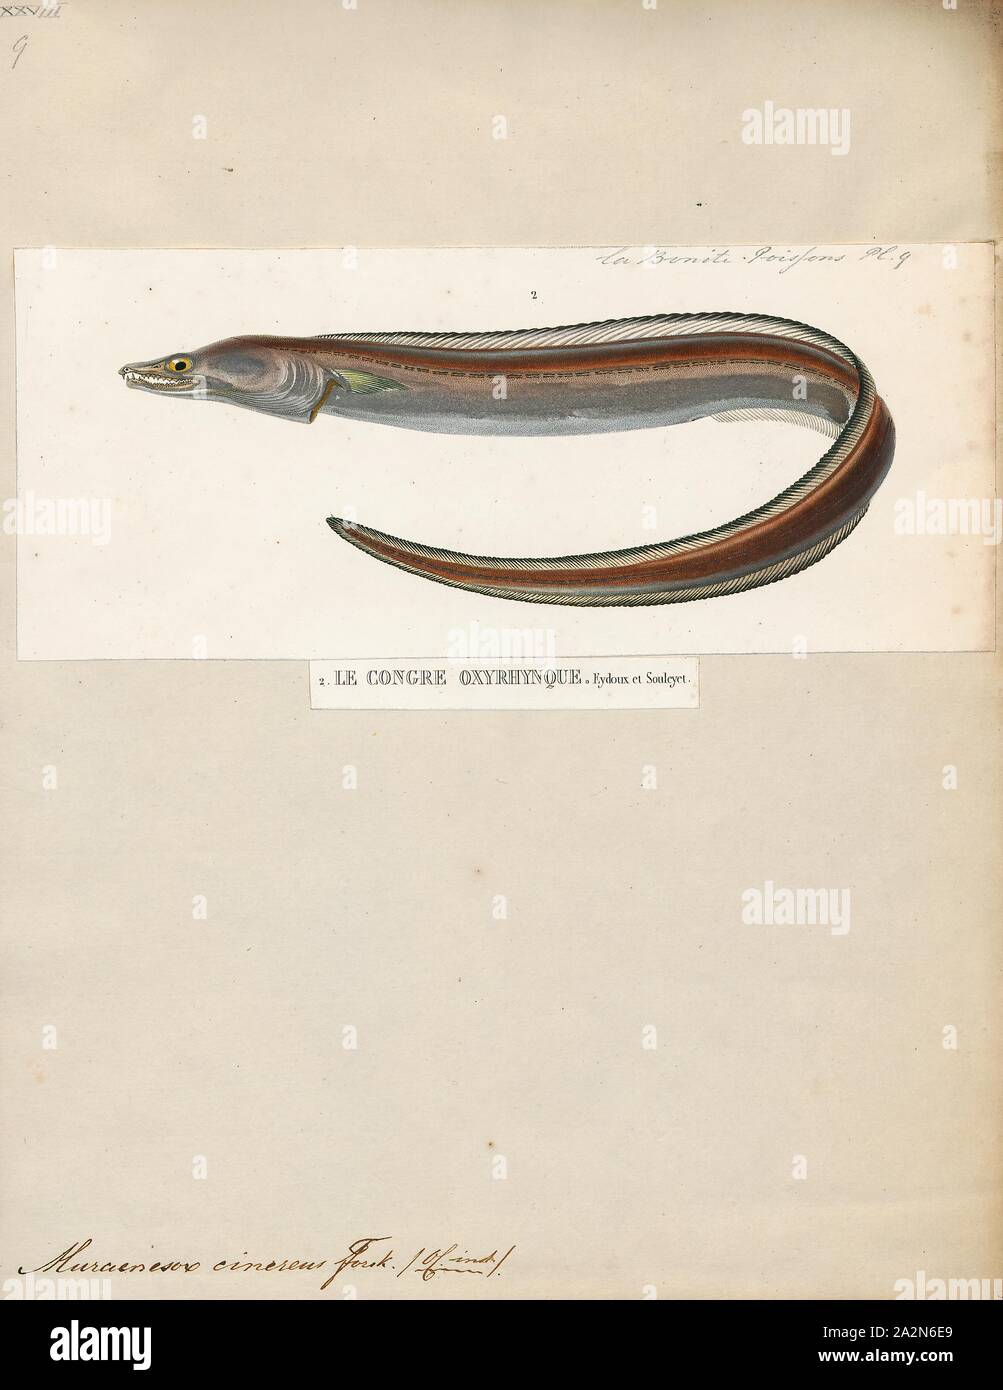 Muraenesox cinereus, Print, The dagger-tooth pike conger (Muraenesox cinereus) is a species of eel. They primarily live on soft bottoms in marine and brackish waters down to a depth of 800 m (2, 600 ft), but may enter freshwater. They are common to about 1.5 m (4.9 ft) in length, but may grow as long as 2.2 m (7.2 ft). Dagger-tooth pike congers occur in the Red Sea, on the coast of the northern Indian Ocean, and in the West Pacific from Indochina to Japan. It has also invaded the Mediterranean through the Suez Canal., 1841-1852 Stock Photo